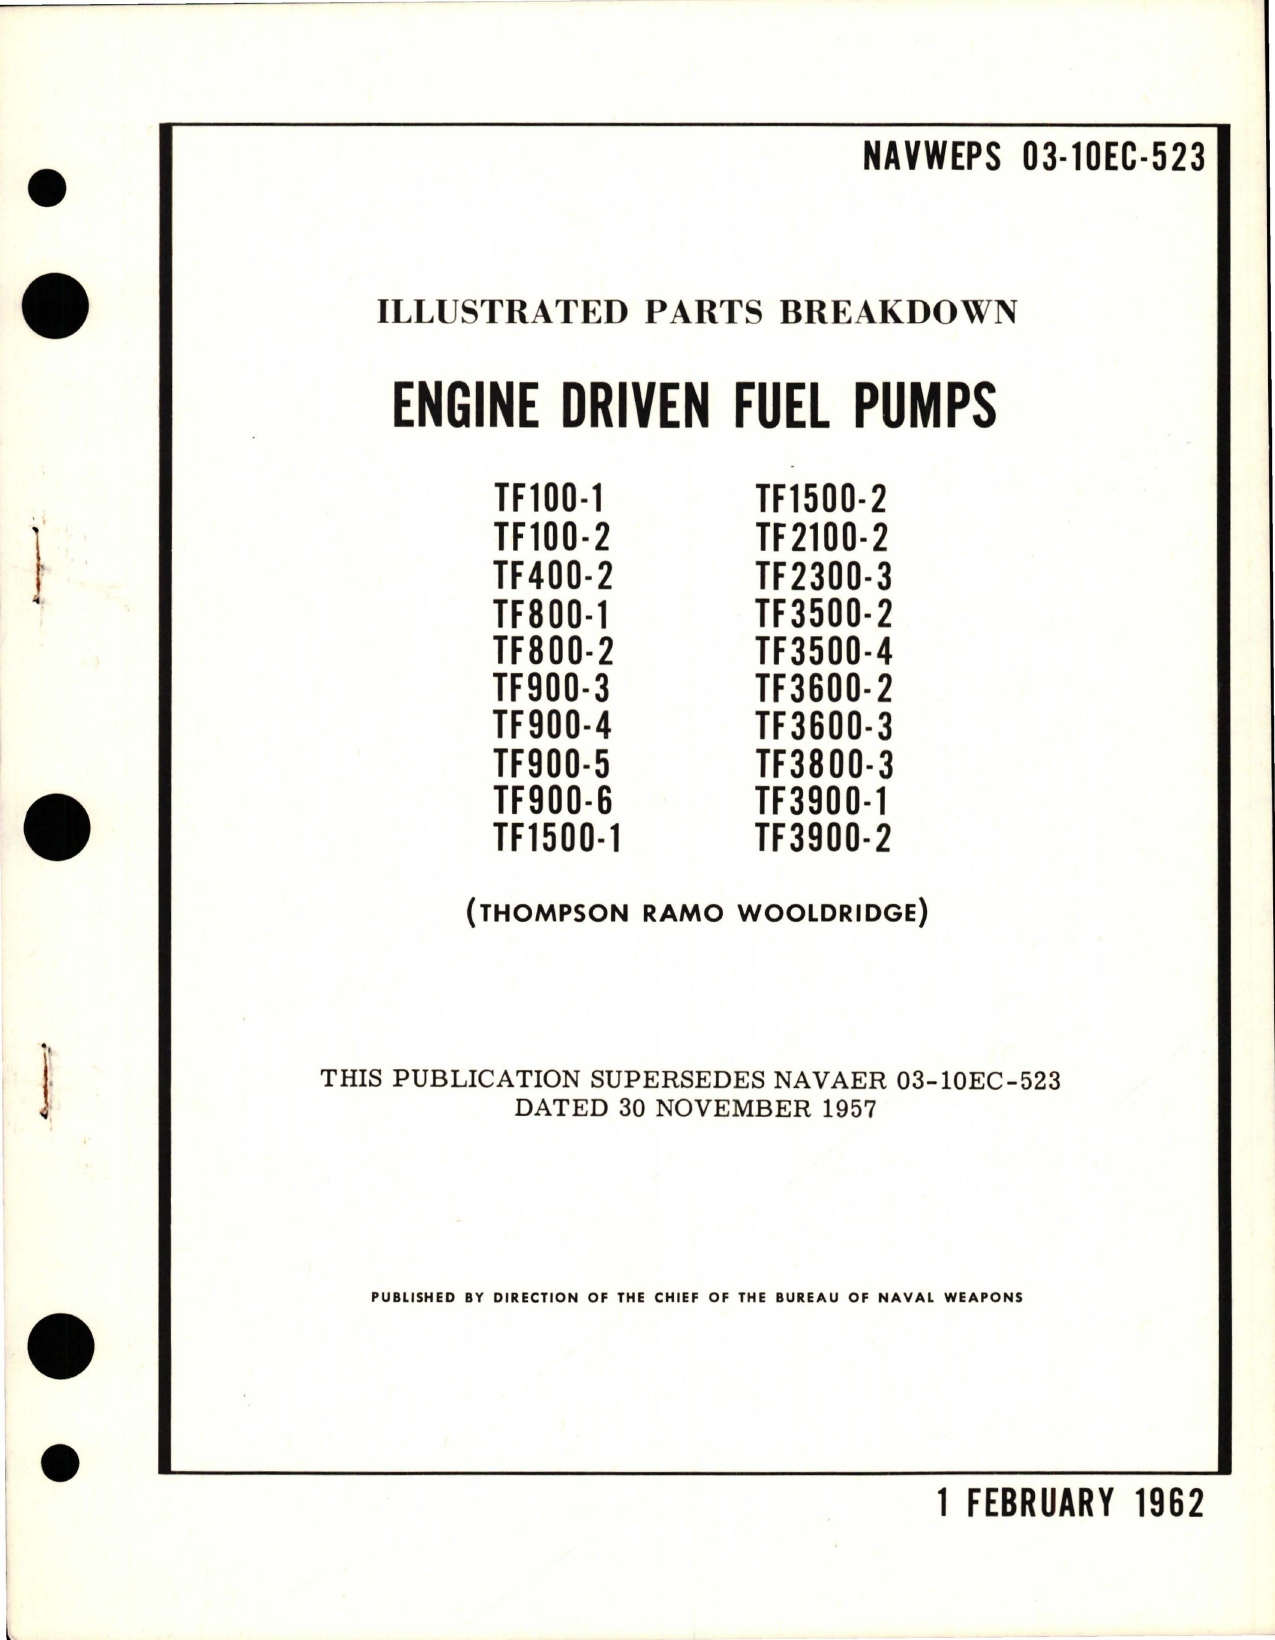 Sample page 1 from AirCorps Library document: Illustrated Parts Breakdown for Engine Driven Fuel Pumps 